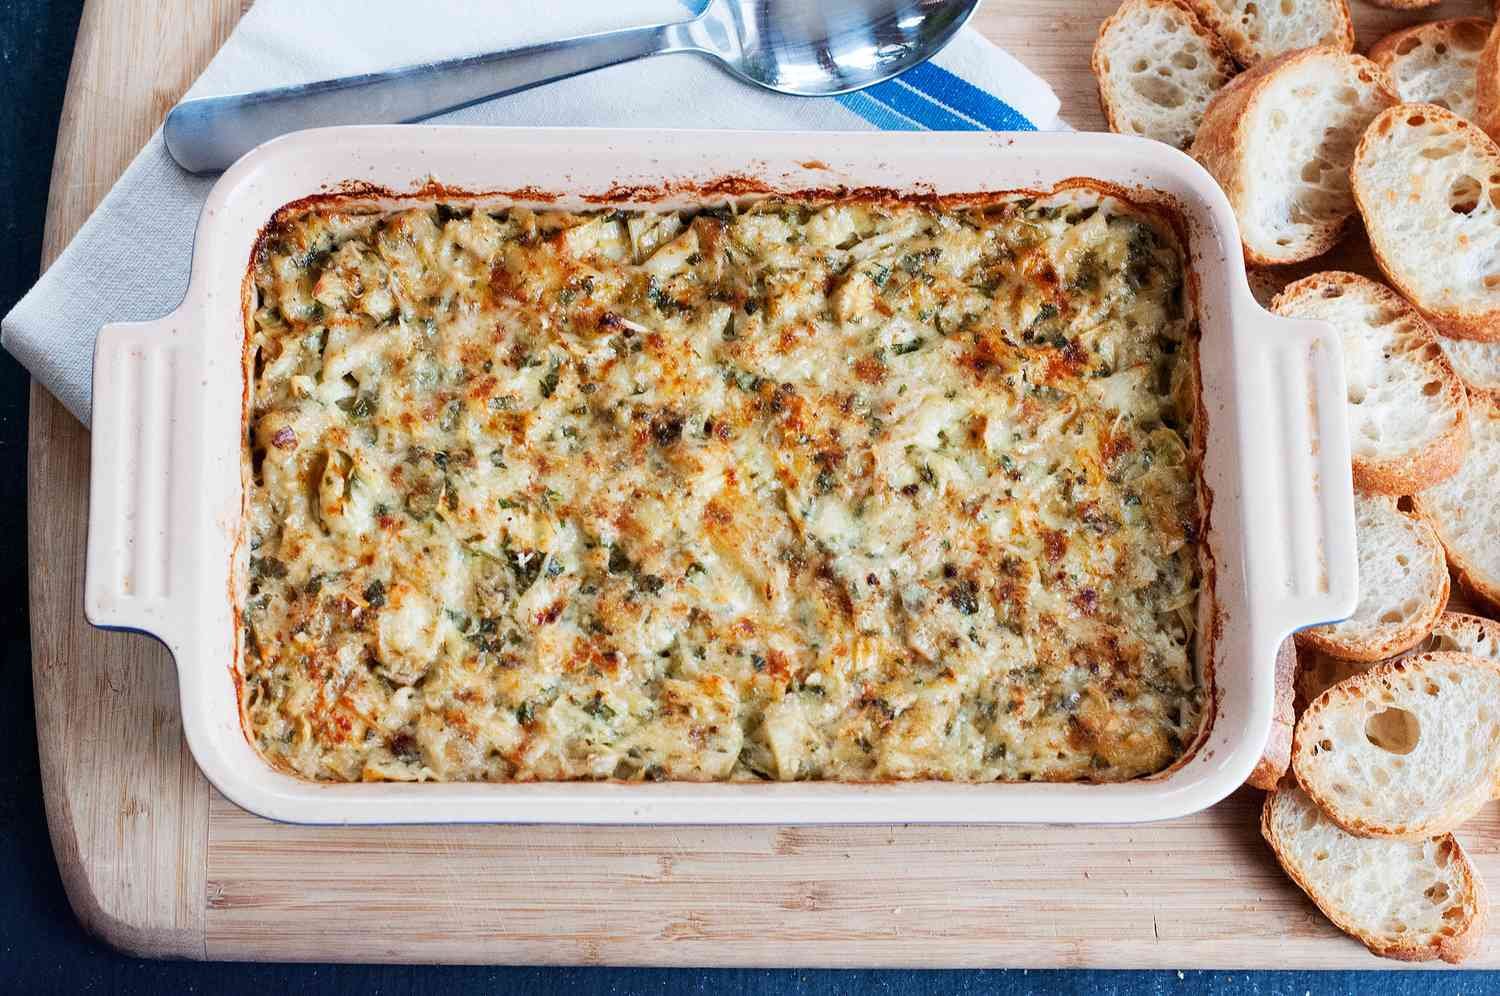 Andrew Zimmern's Game Day Crab Dip Will Be Gone Before the First Touchdown